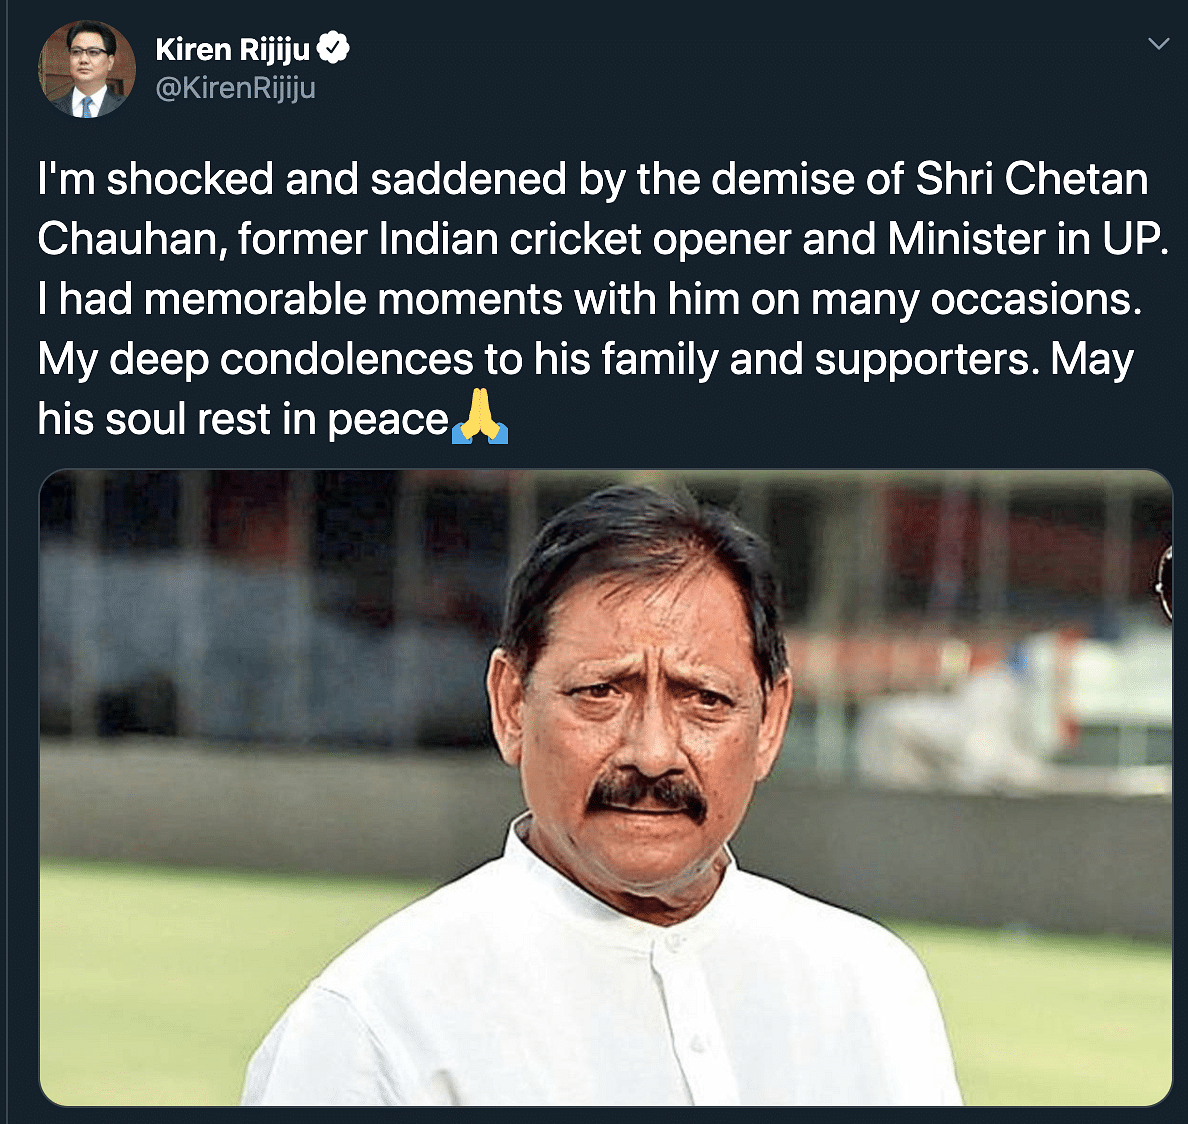 PM Narendra Modi said he was “anguished” by the passing away of former cricketer and UP minister Chetan Chauhan.